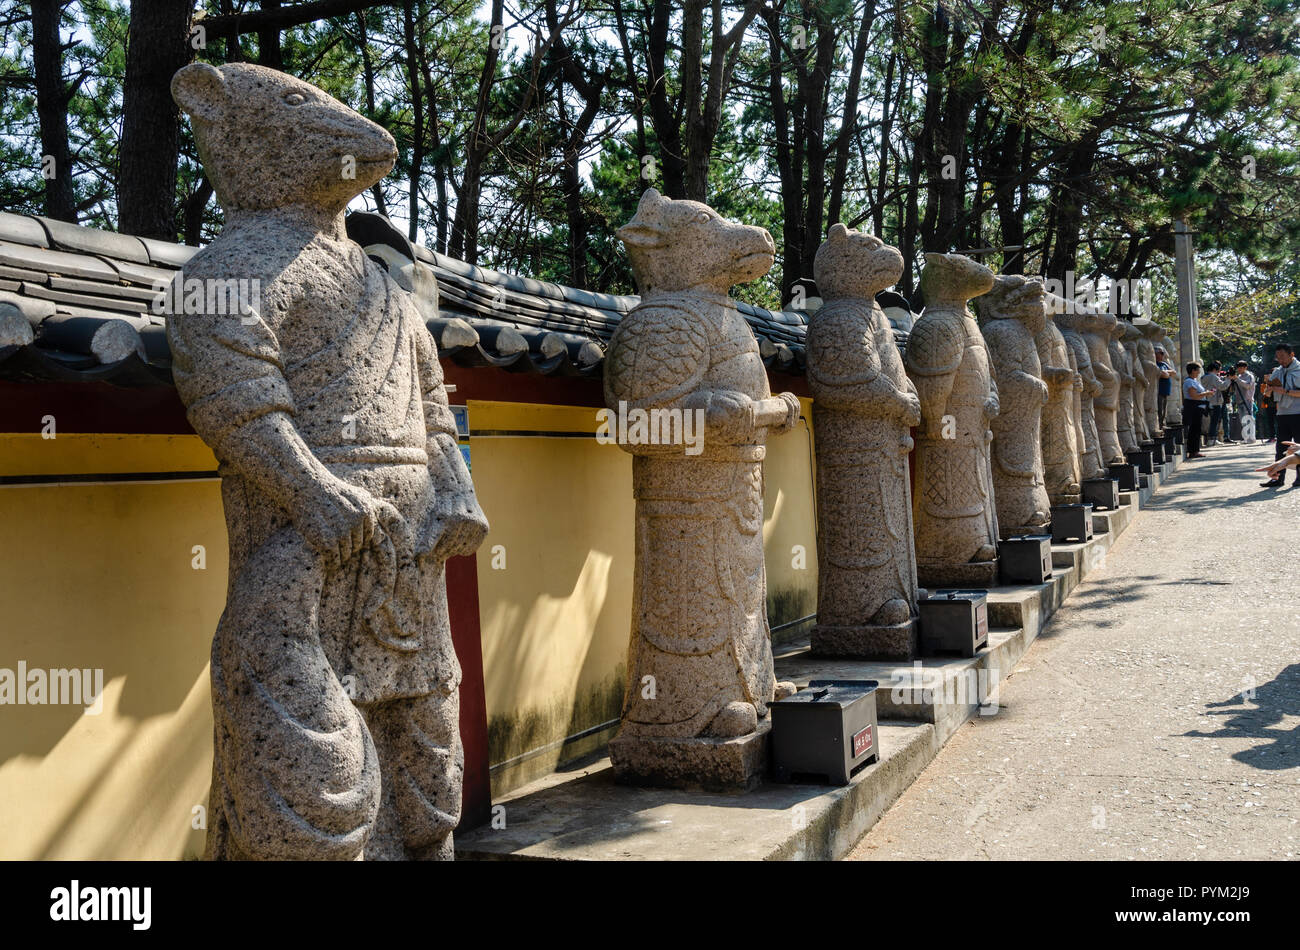 Animal Figures representing the Chinese Zodiac at the Buddhist temple Haedong Yonggung Temple in Busan, South Korea. Stock Photo